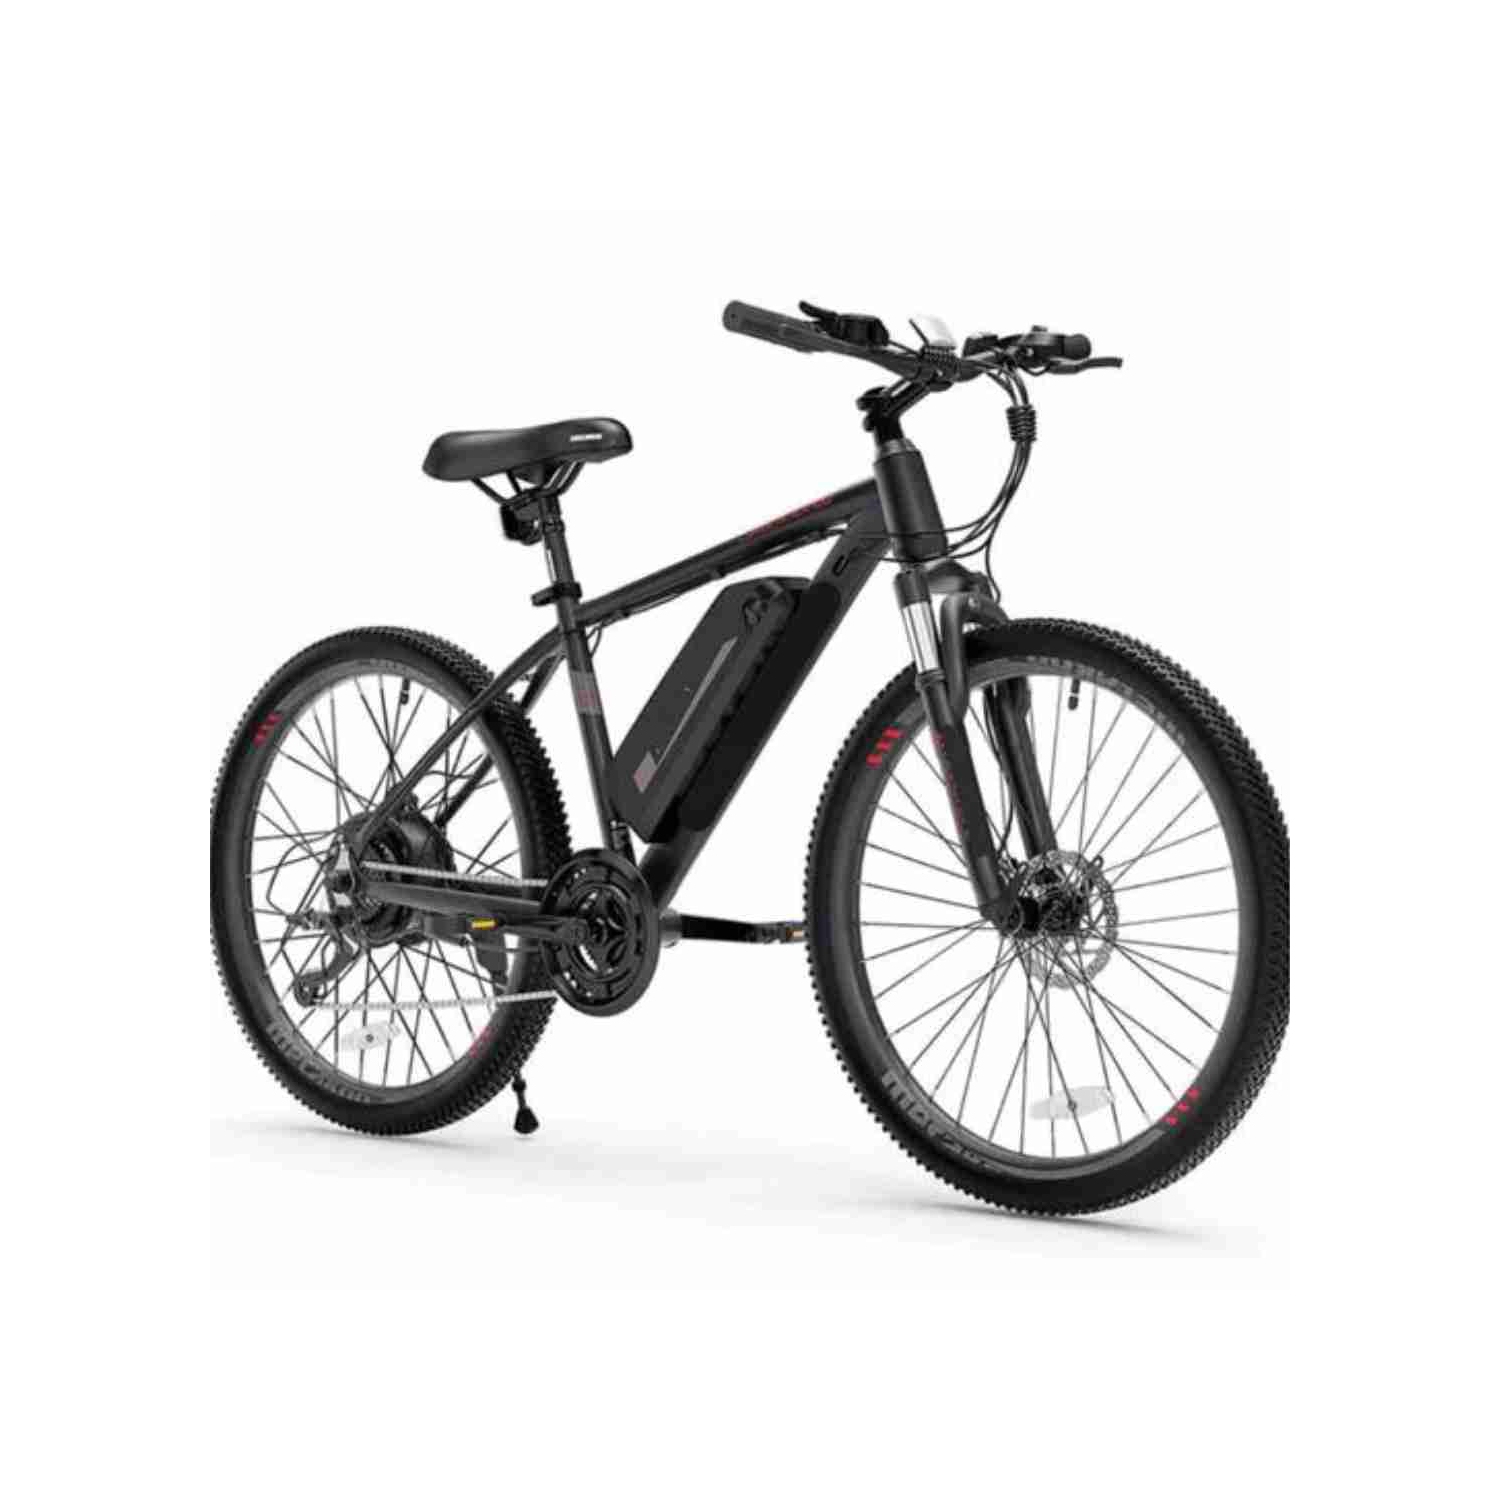 Macfox Cybertrack 100 Electric Off-Road Mountain Bike l 26” Tires | Shimano Professional Speed l 350W Motor l Speed up to 32km |Range up to 91 km |Removable Battery Adult E-bike